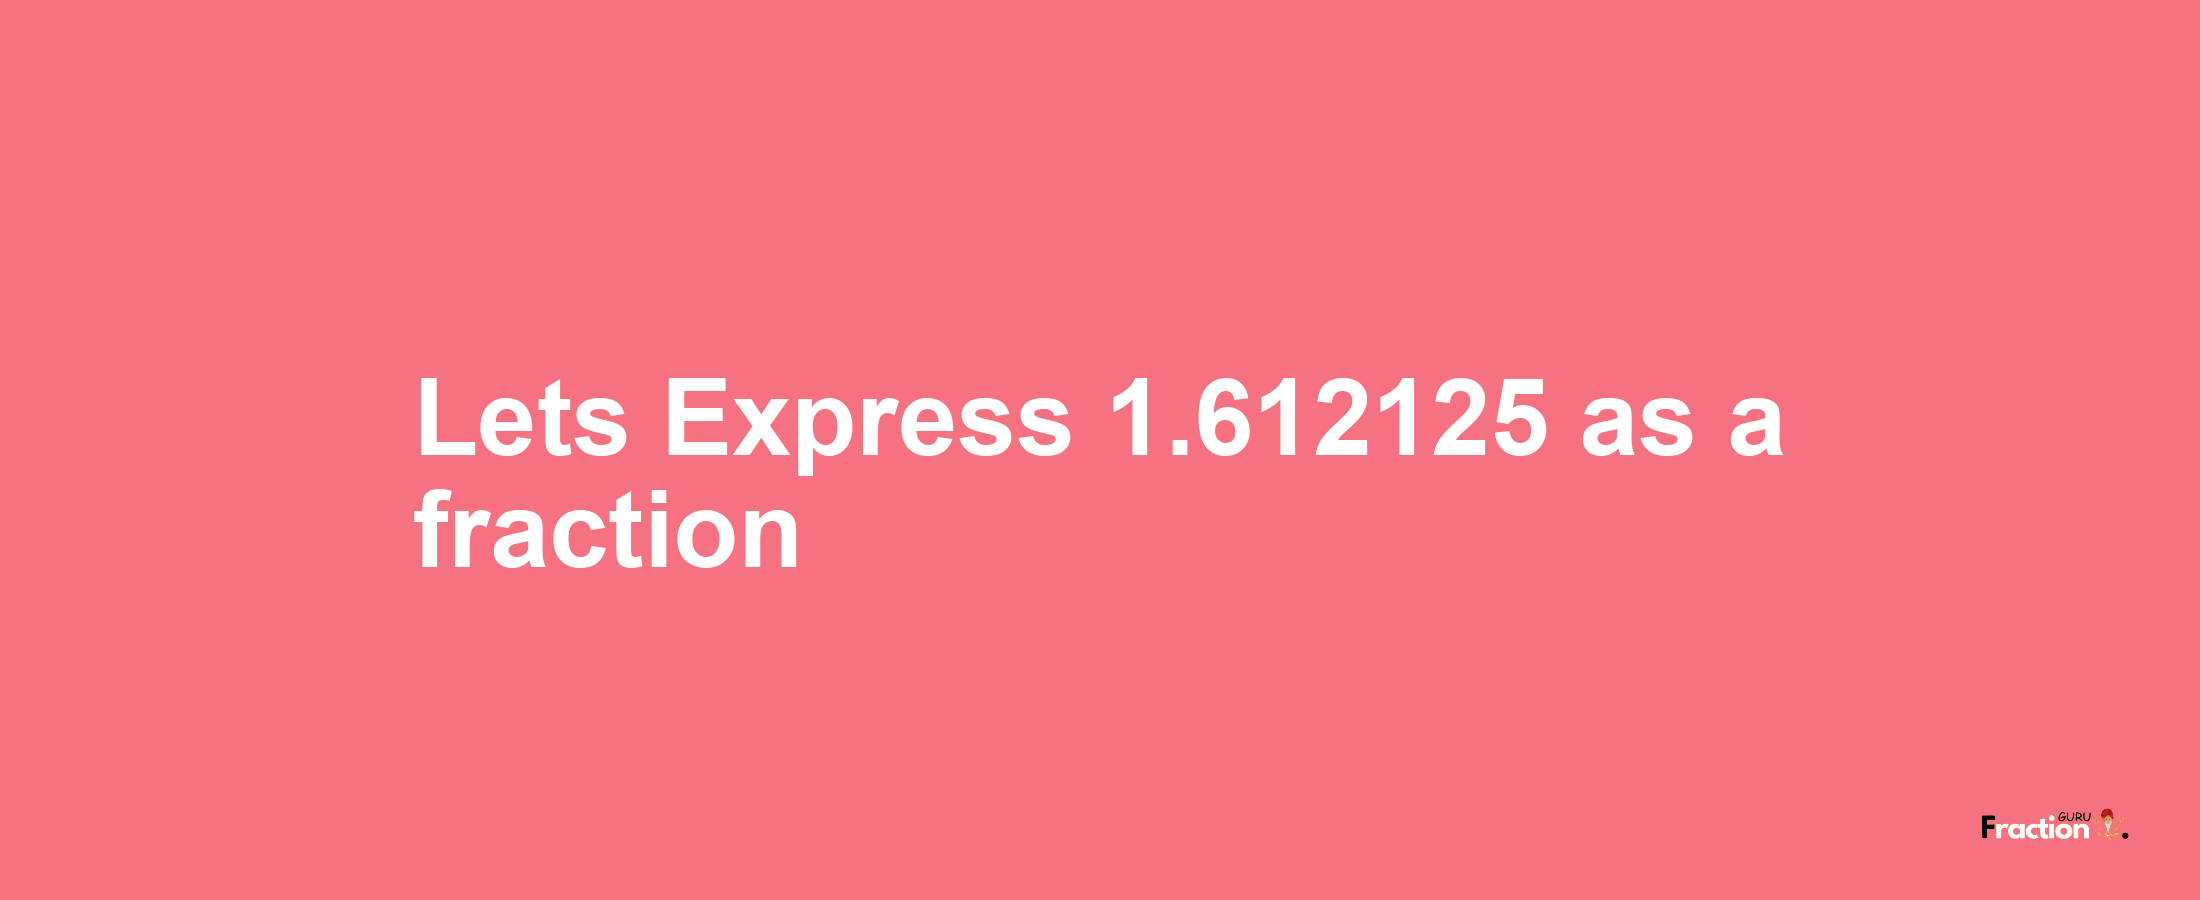 Lets Express 1.612125 as afraction